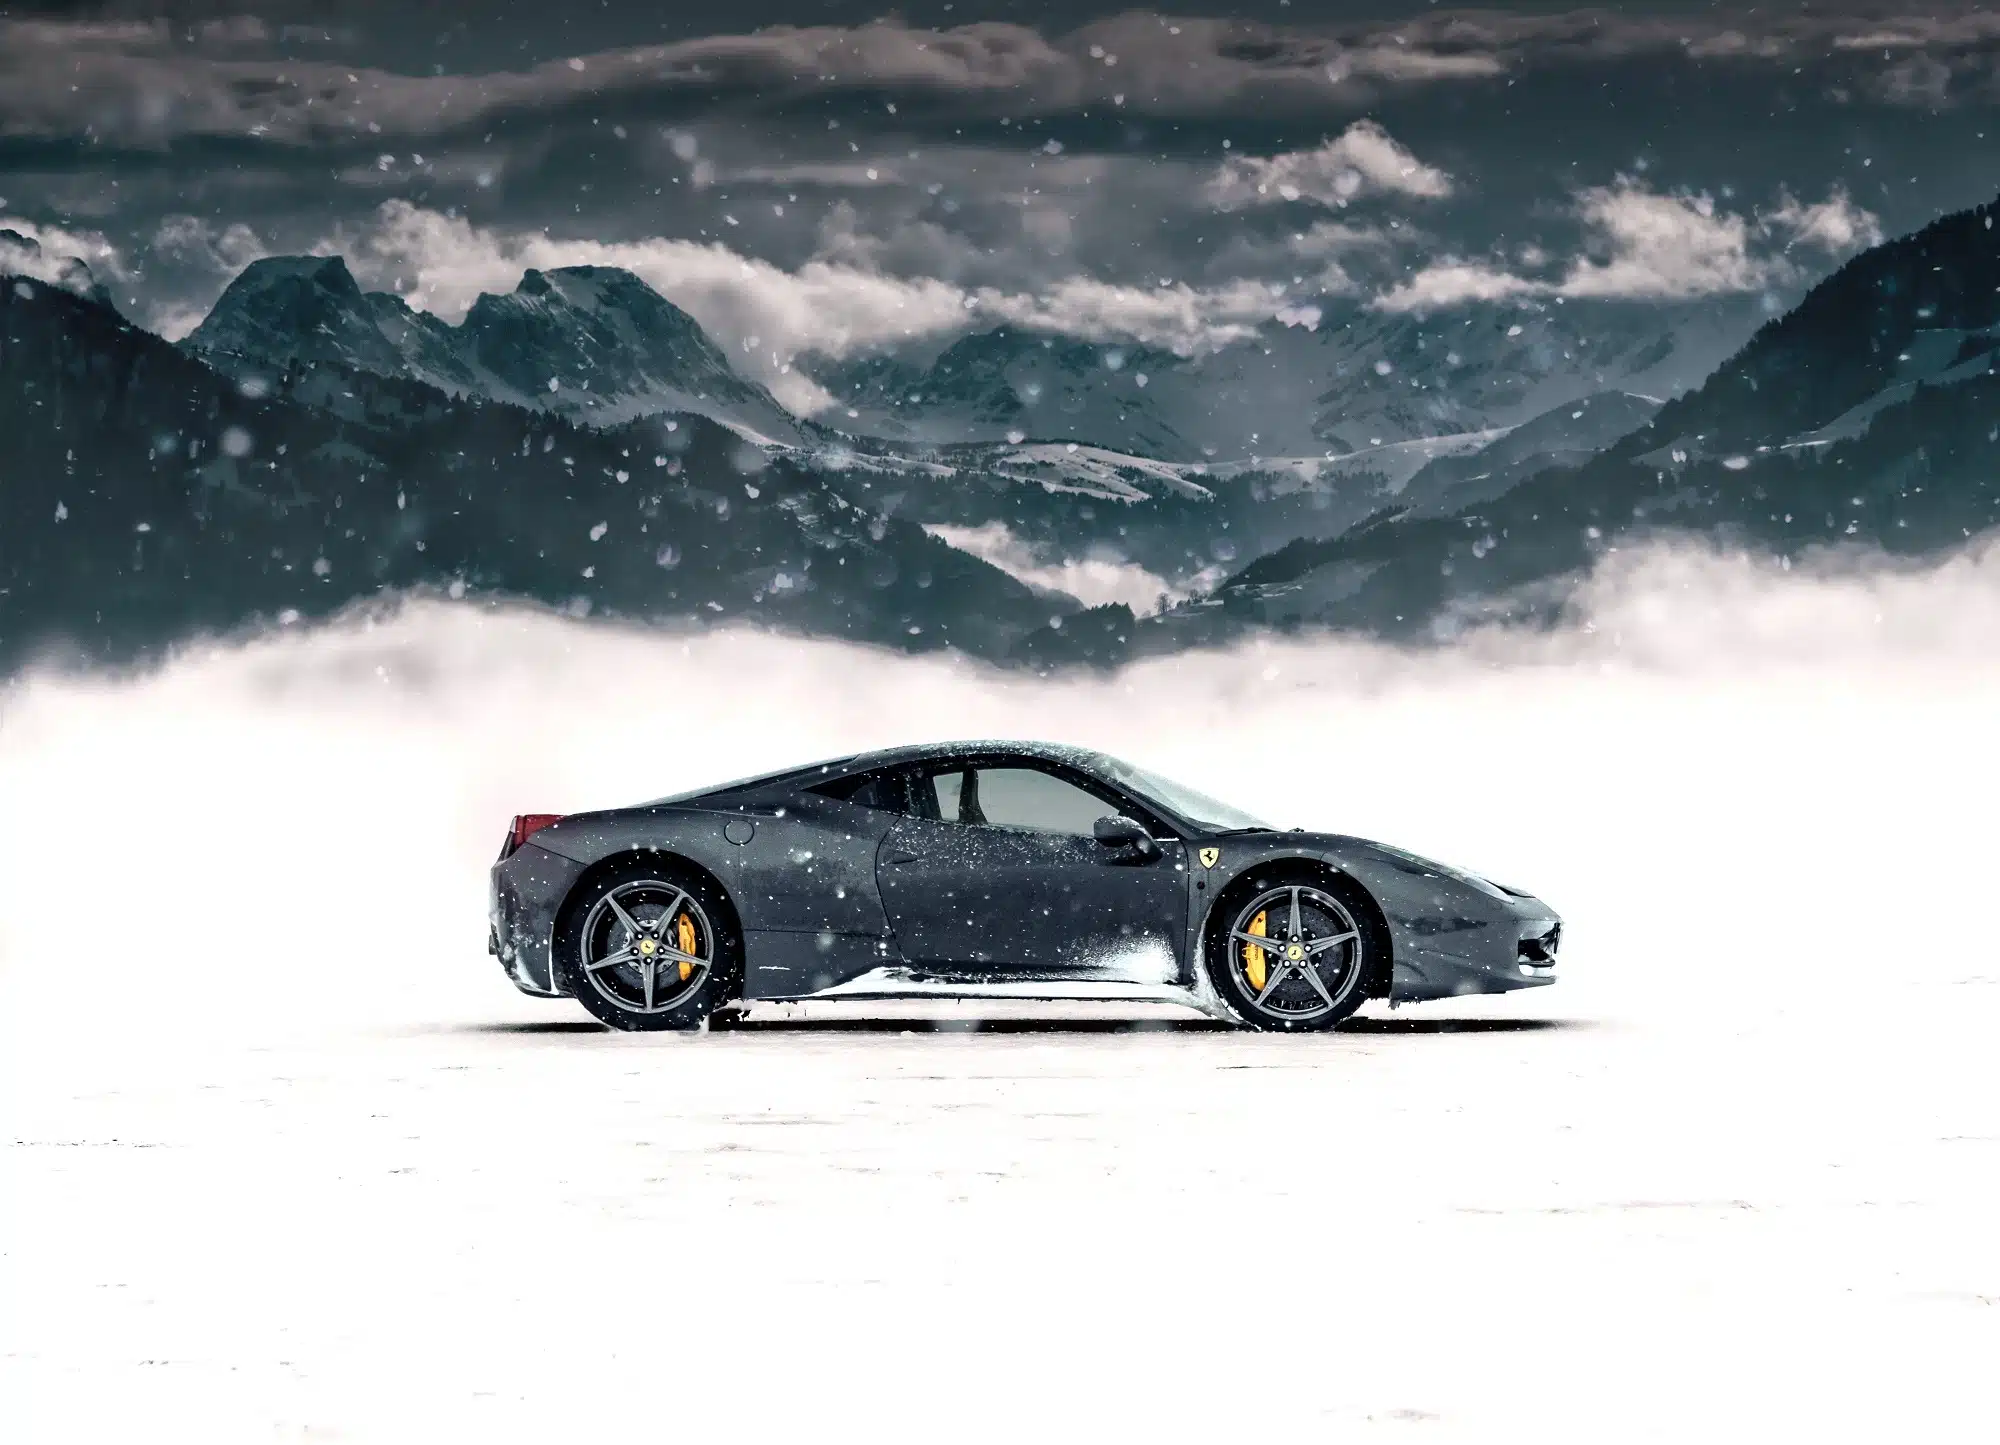 A car on snow, representing the concept of luxury car tax.